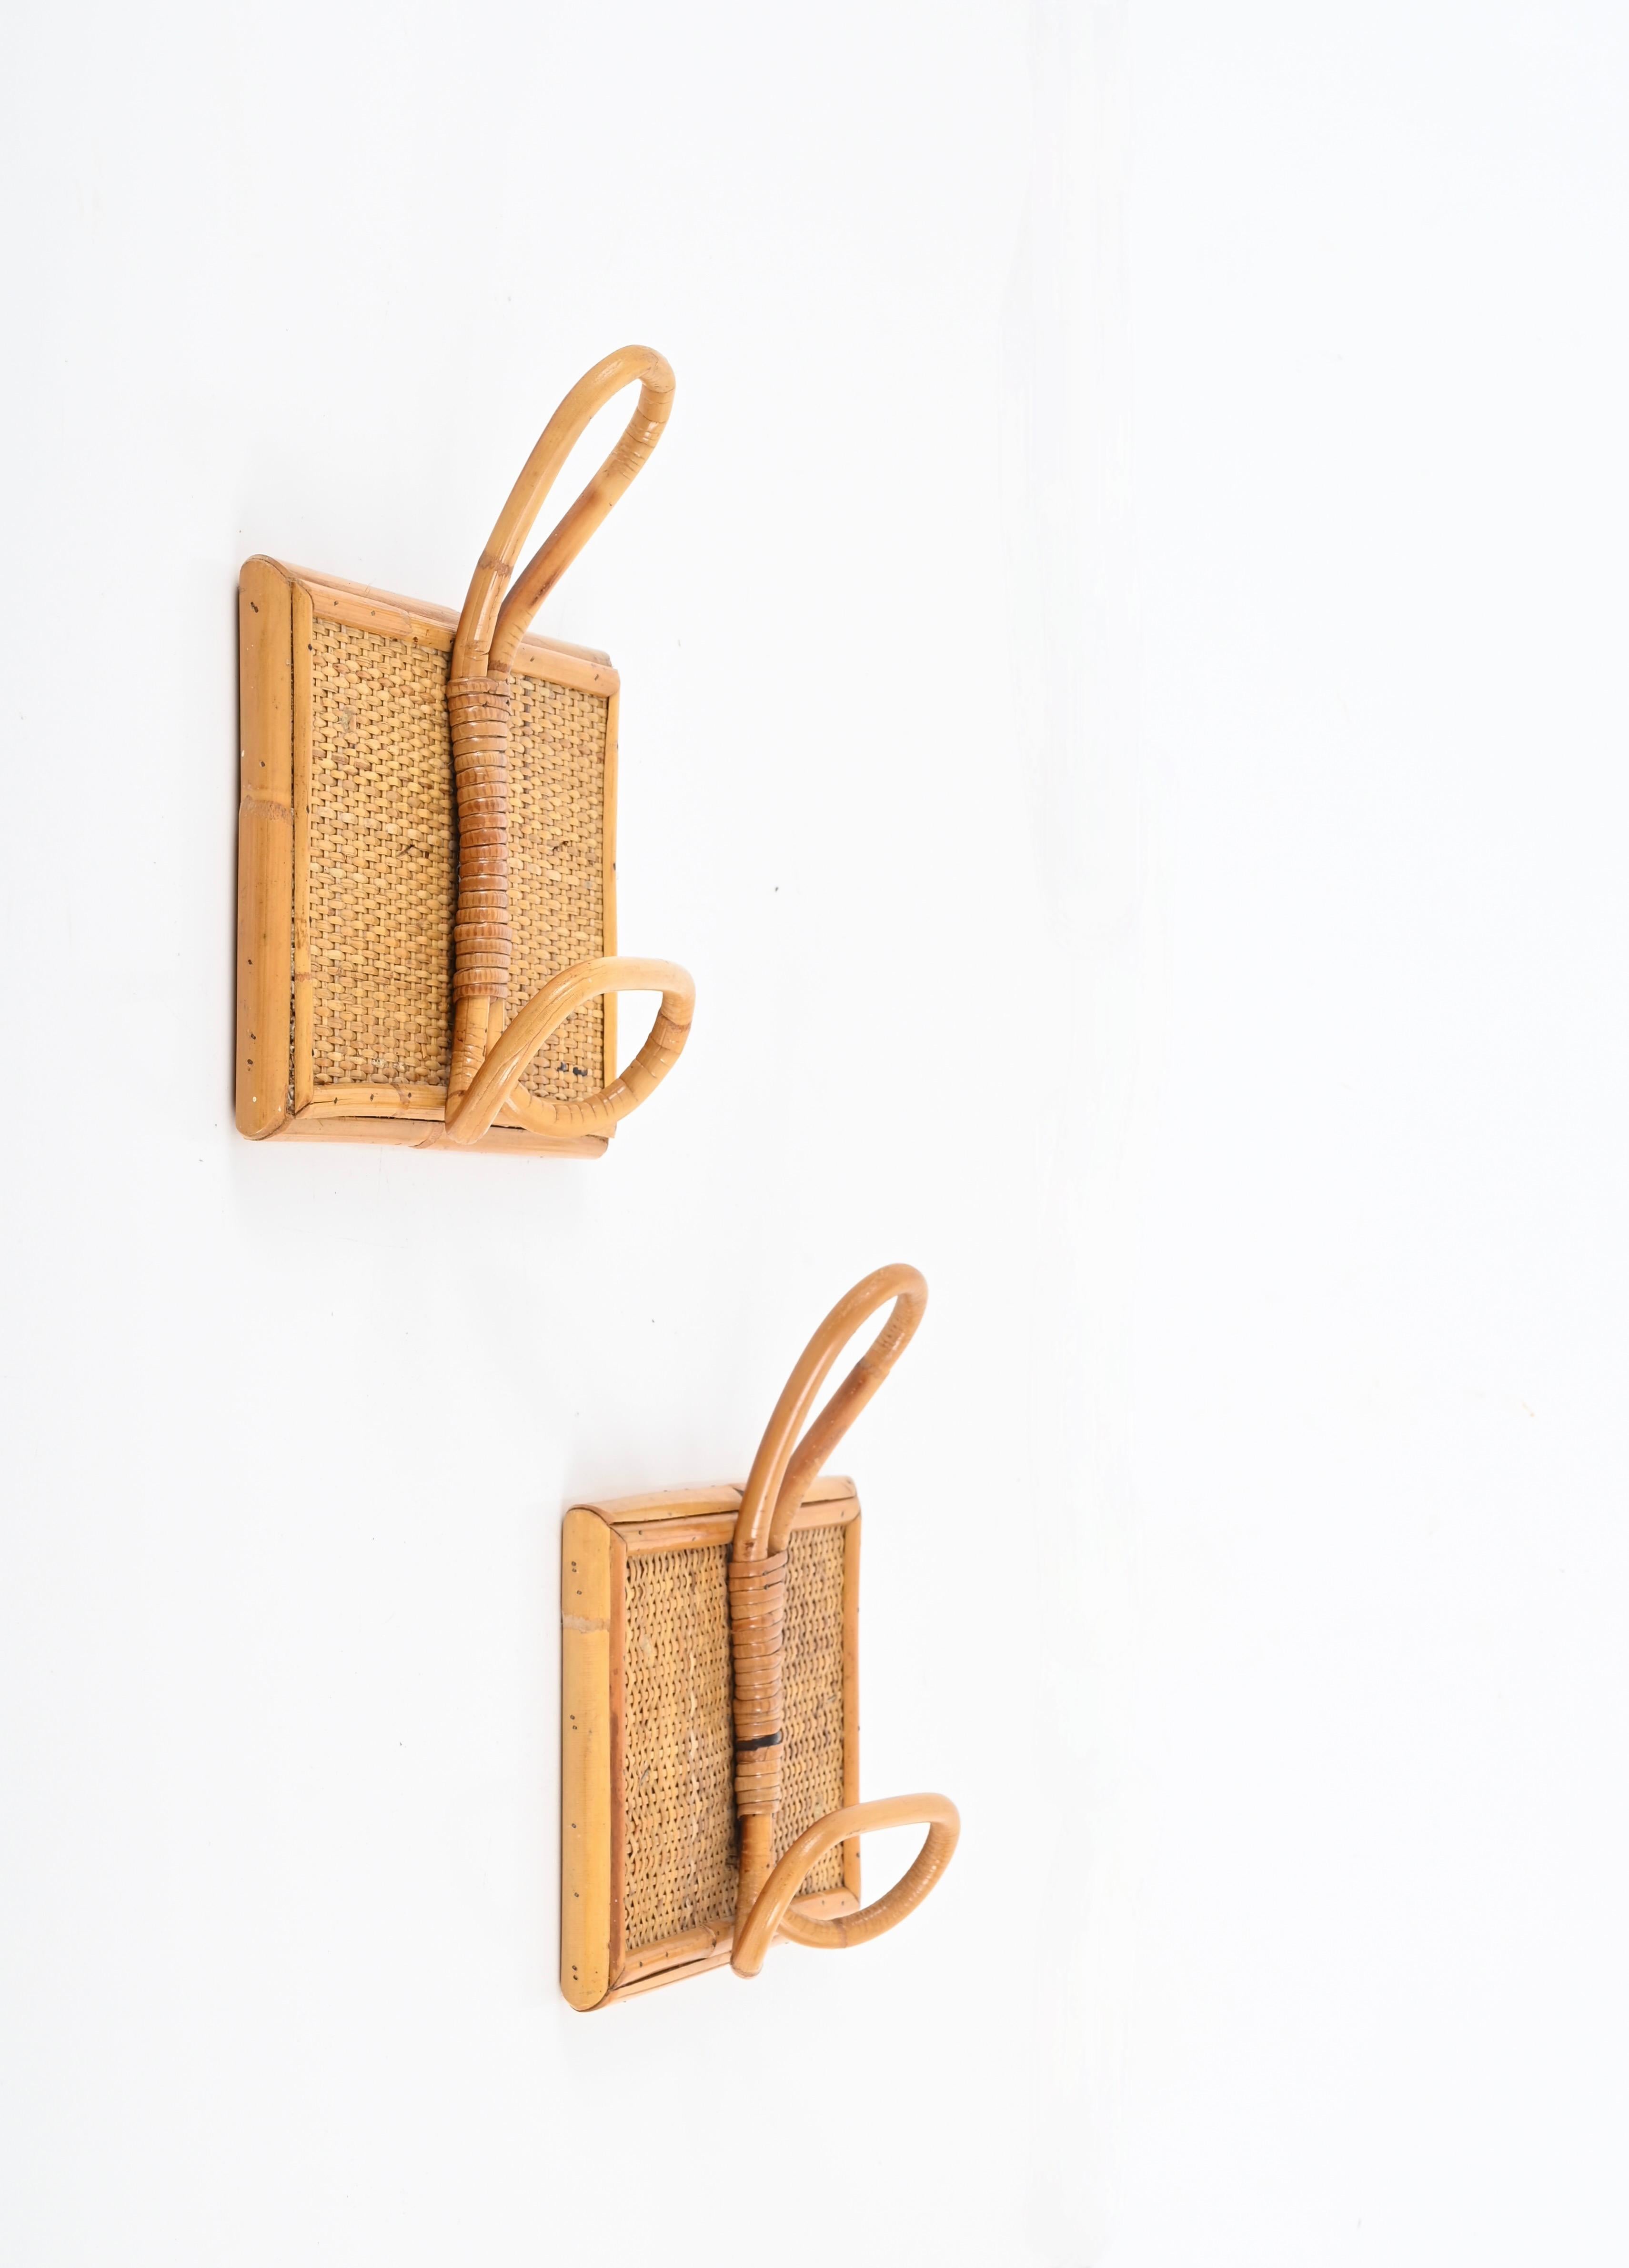 Fantastic set of two midcentury rectangular coat hangers in curved bamboo, rattan and wicker. These lovely coat hooks were designed in Italy during the 1960s following the French Riviera trend.

These stunning pieces feature a sturdy rectangular